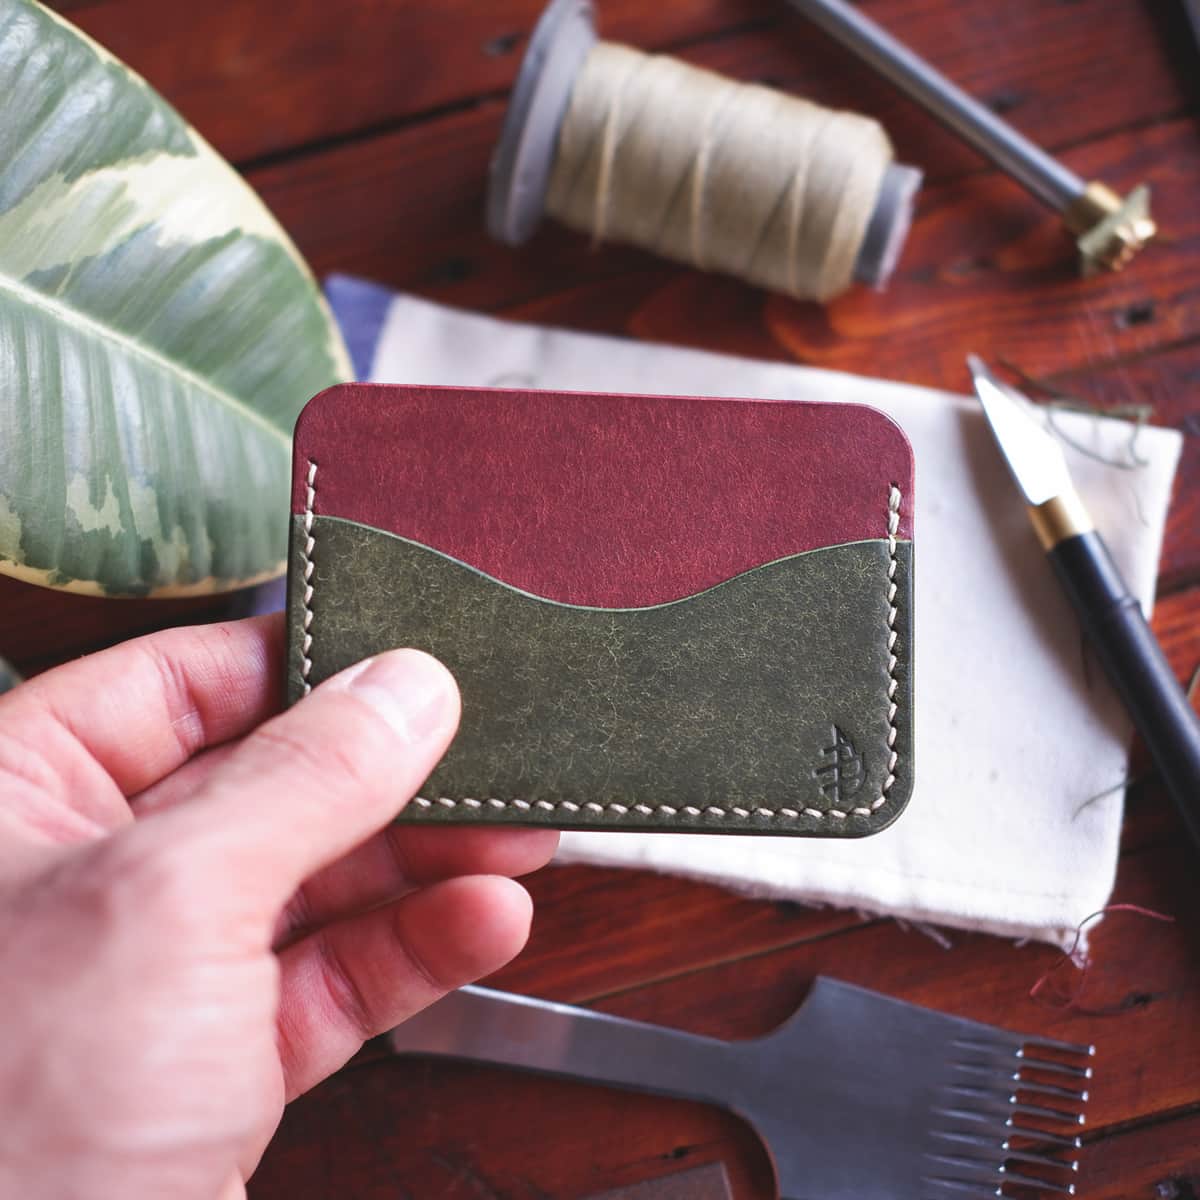 The Pinyon Card Holder in Coccinella and Olive Pueblo vegetable tanned leather held in hand